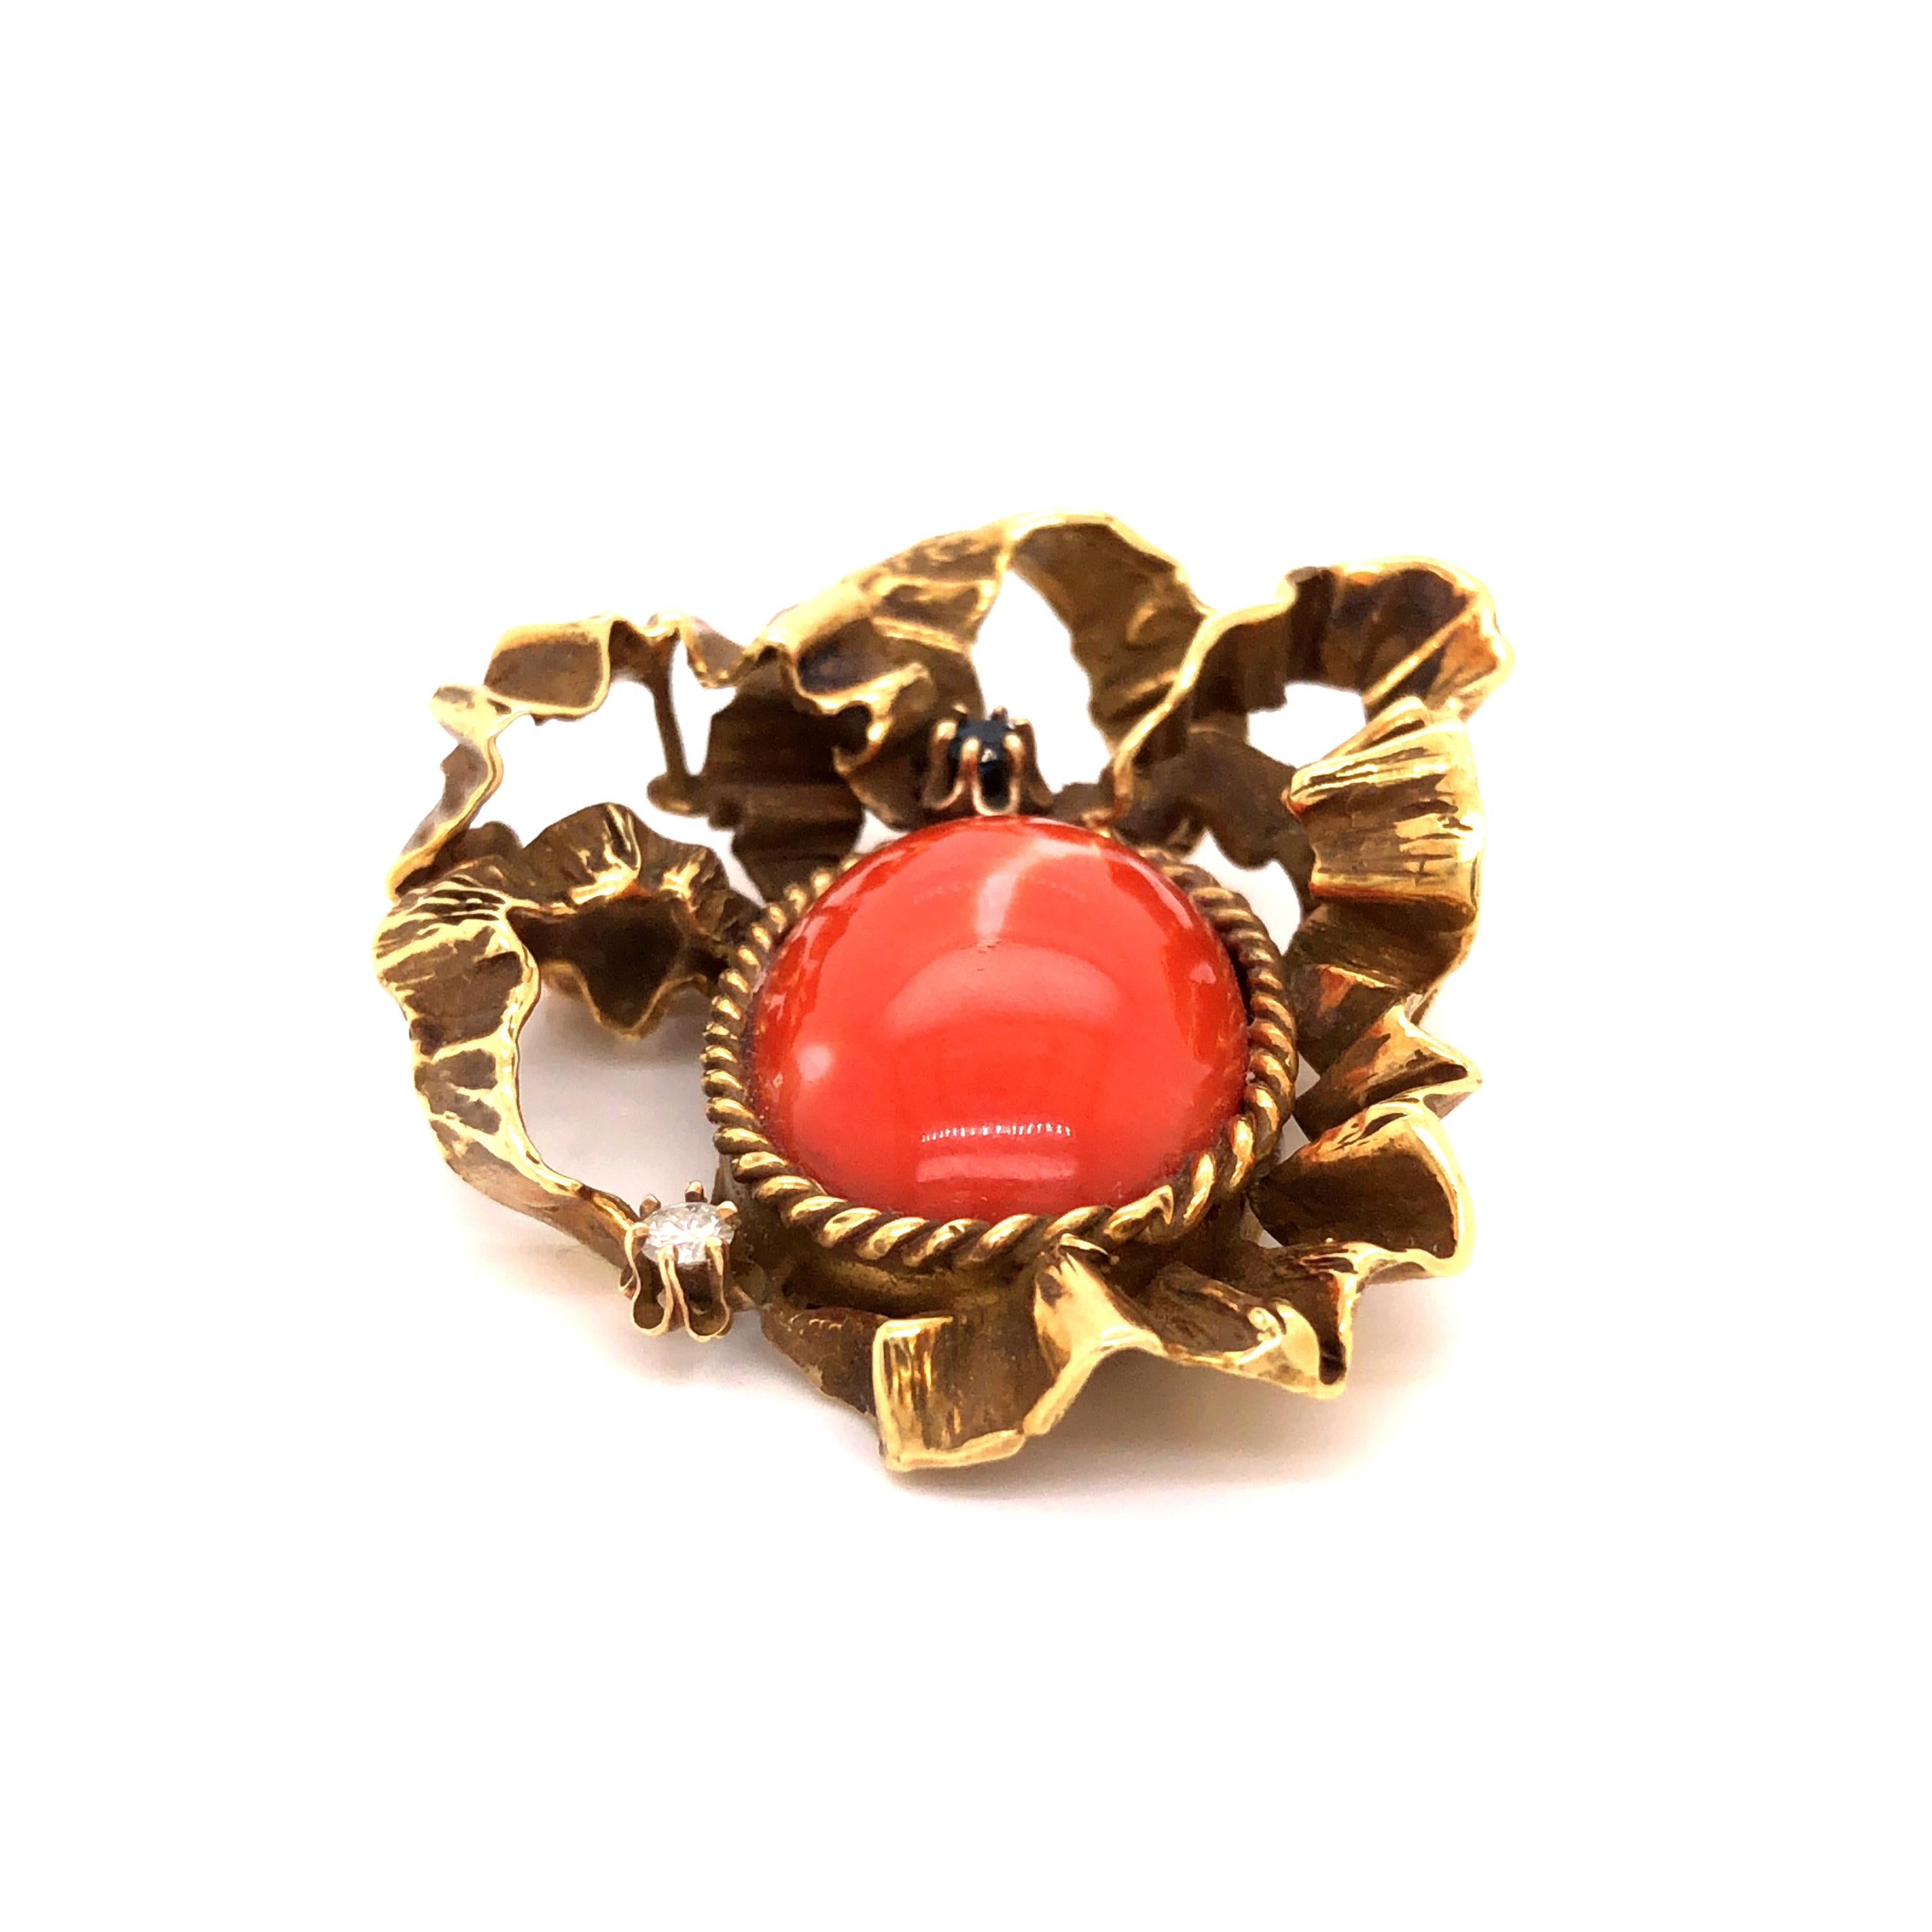 An 18K yellow gold brooch pendant featuring an oval cut coral cabochon with a single round brilliant cut diamond accent and a single cut faceted sapphire.

Stone: Coral, Diamond, Sapphire

Metal: 18K Yellow Gold

Size: 1.70